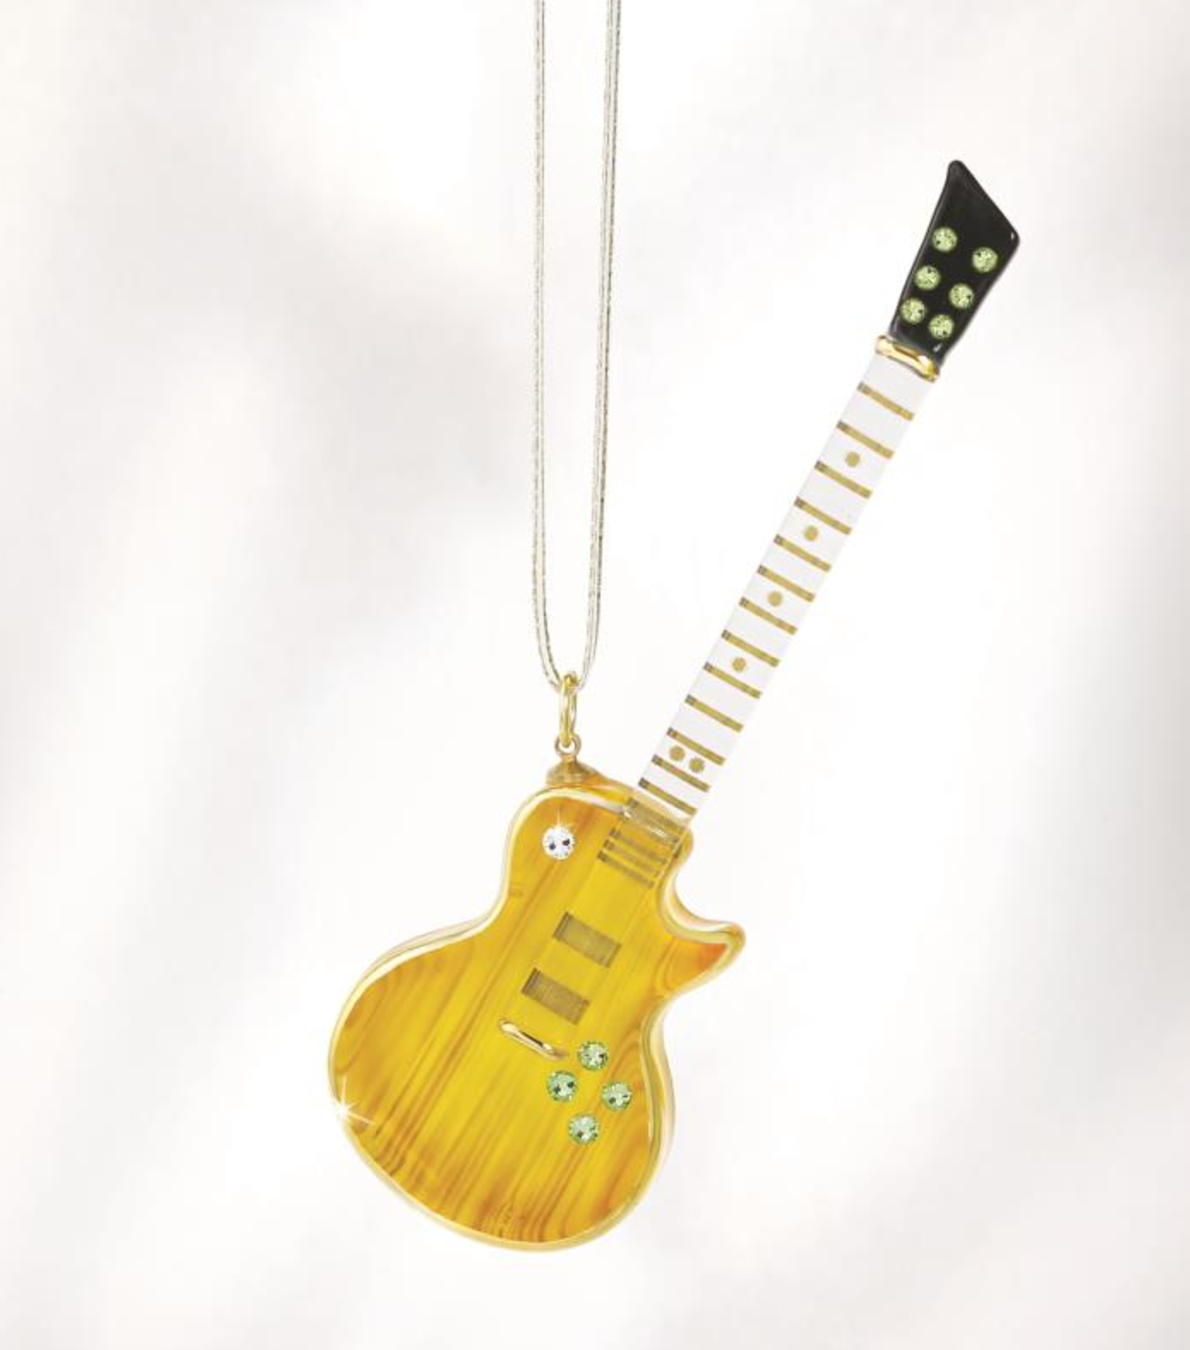 Glass Guitar Ornament, Christmas Figurine, Handmade Yellow Ornament, Gift for a Musician, Guitar Lover, 4" Hanging Holiday Ornament